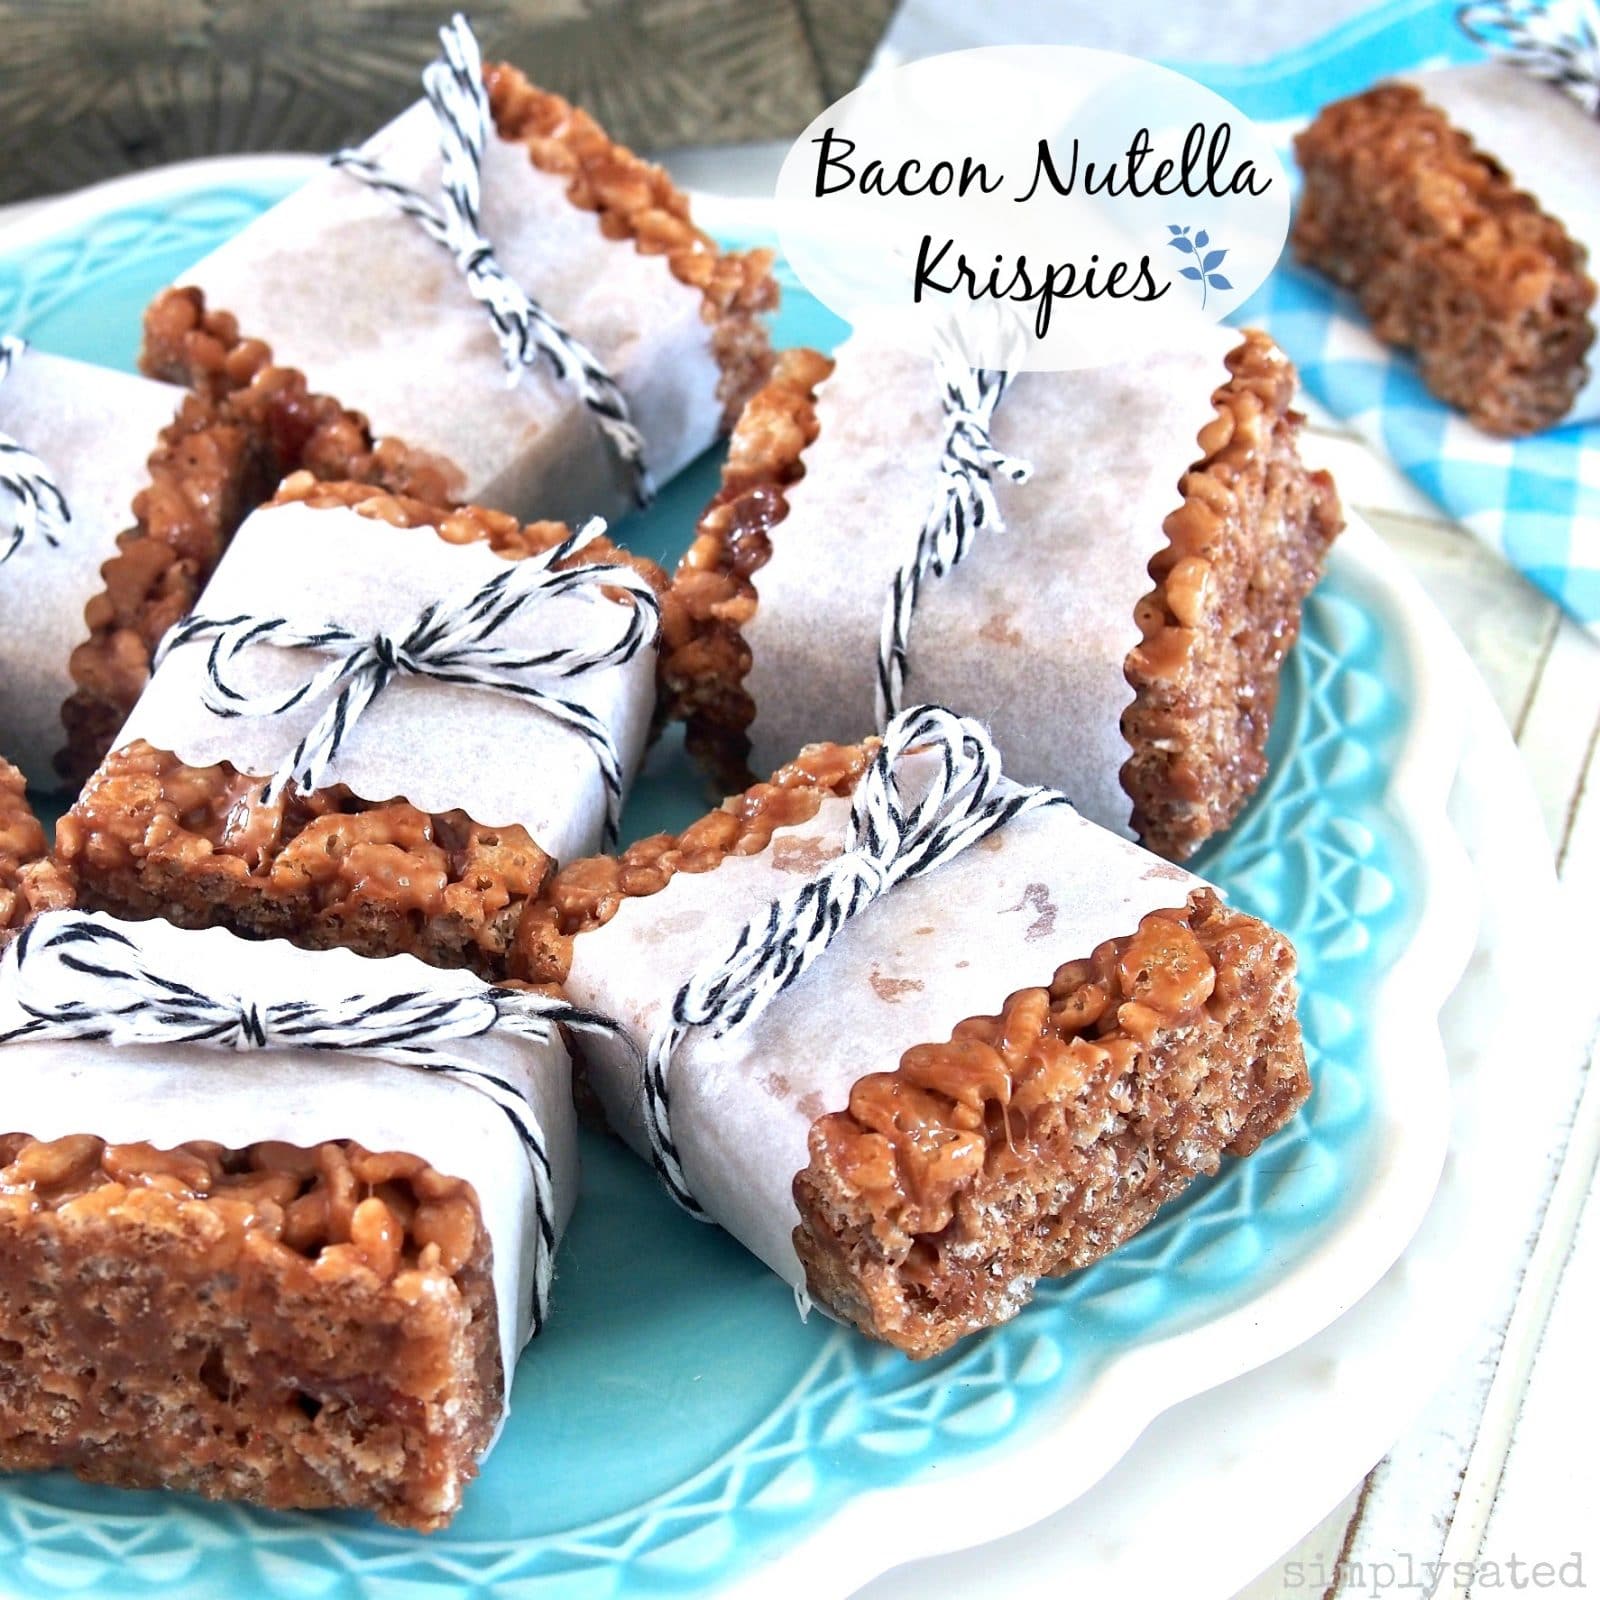 Bacon Nutella Krispies - krispie treats pumped up with the addition of chocolate hazelnut and bacon - a fun twist on a traditional dessert.